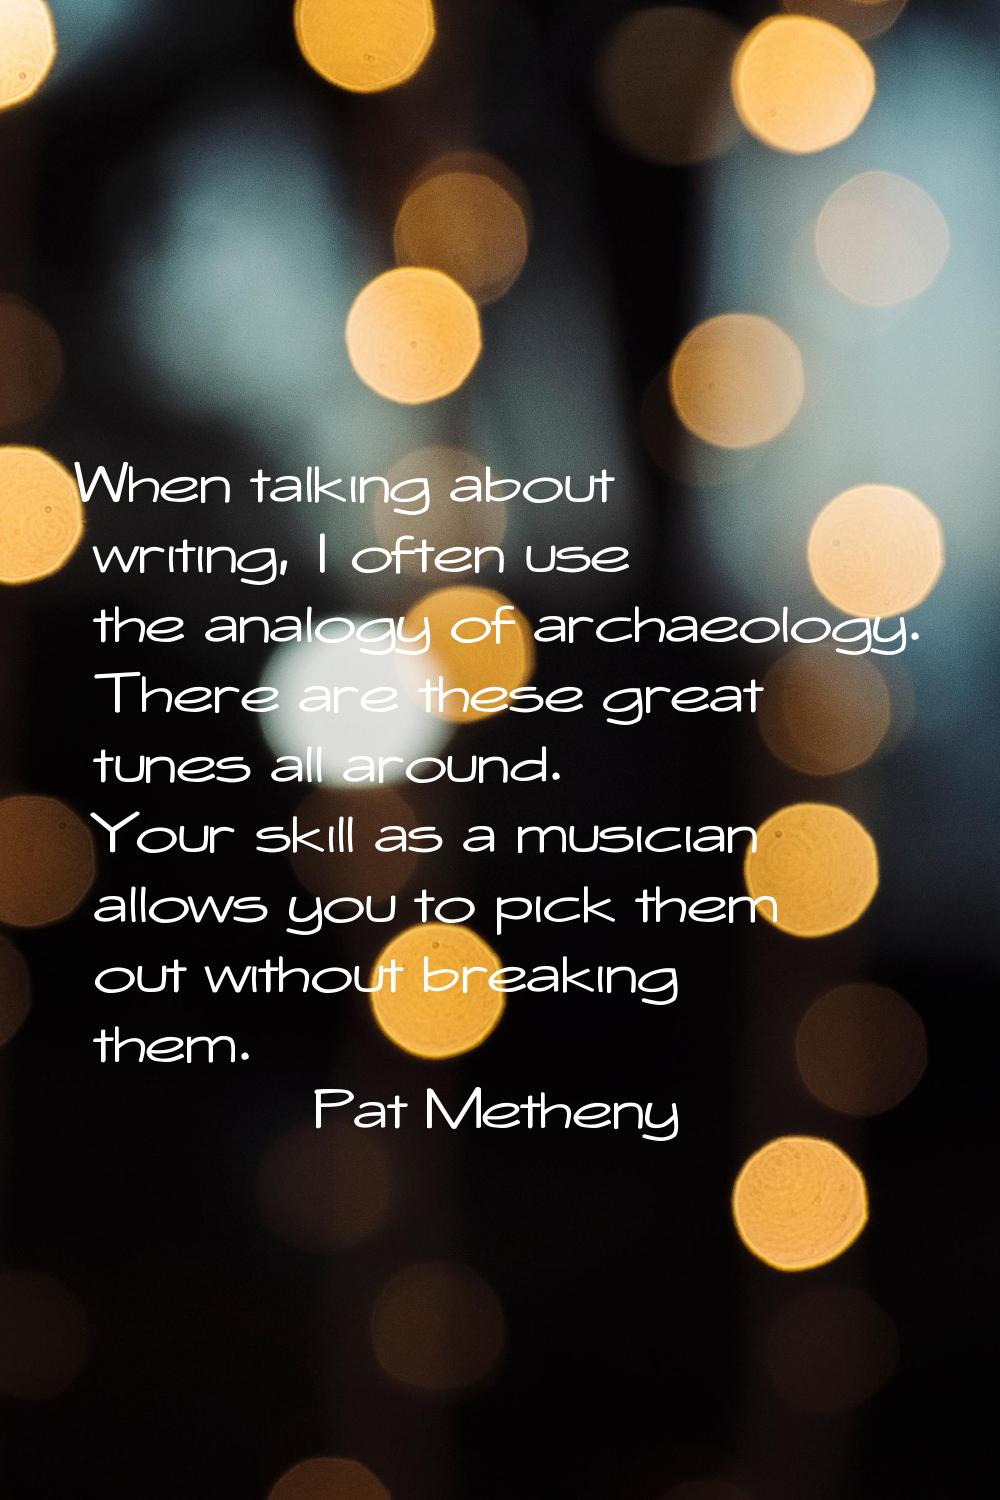 When talking about writing, I often use the analogy of archaeology. There are these great tunes all